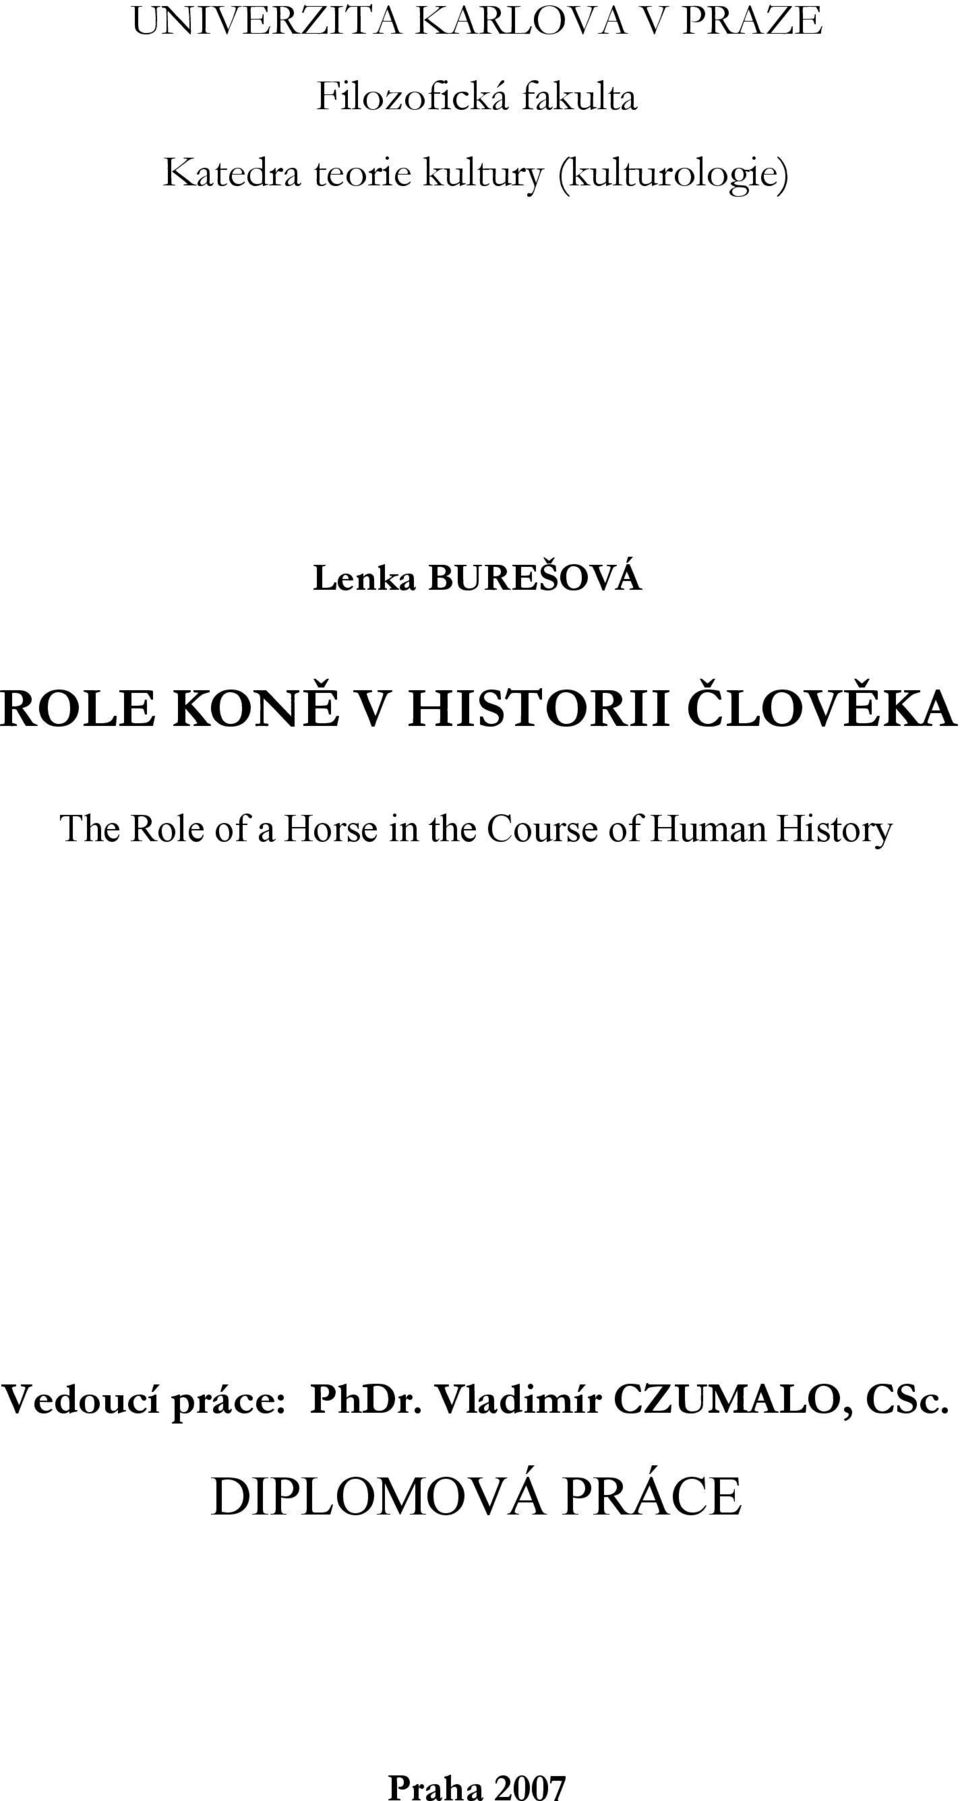 ČLOVĚKA The Role of Horse in the Course of Humn History